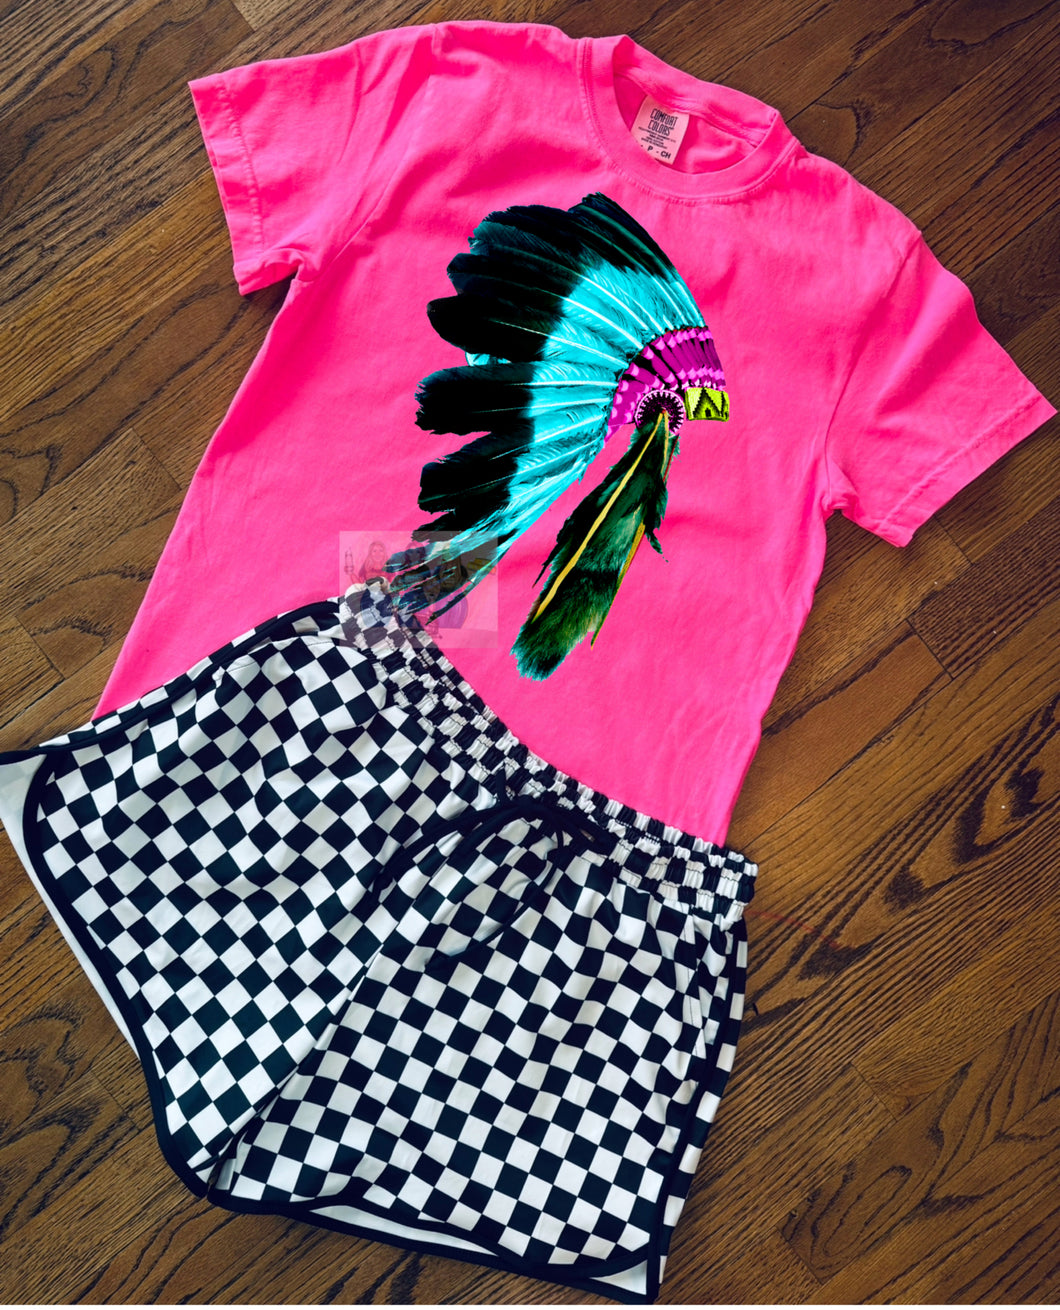 Neon pink comfort colors Indian headdress graphic tee // checkered shorts sold separately - Mavictoria Designs Hot Press Express